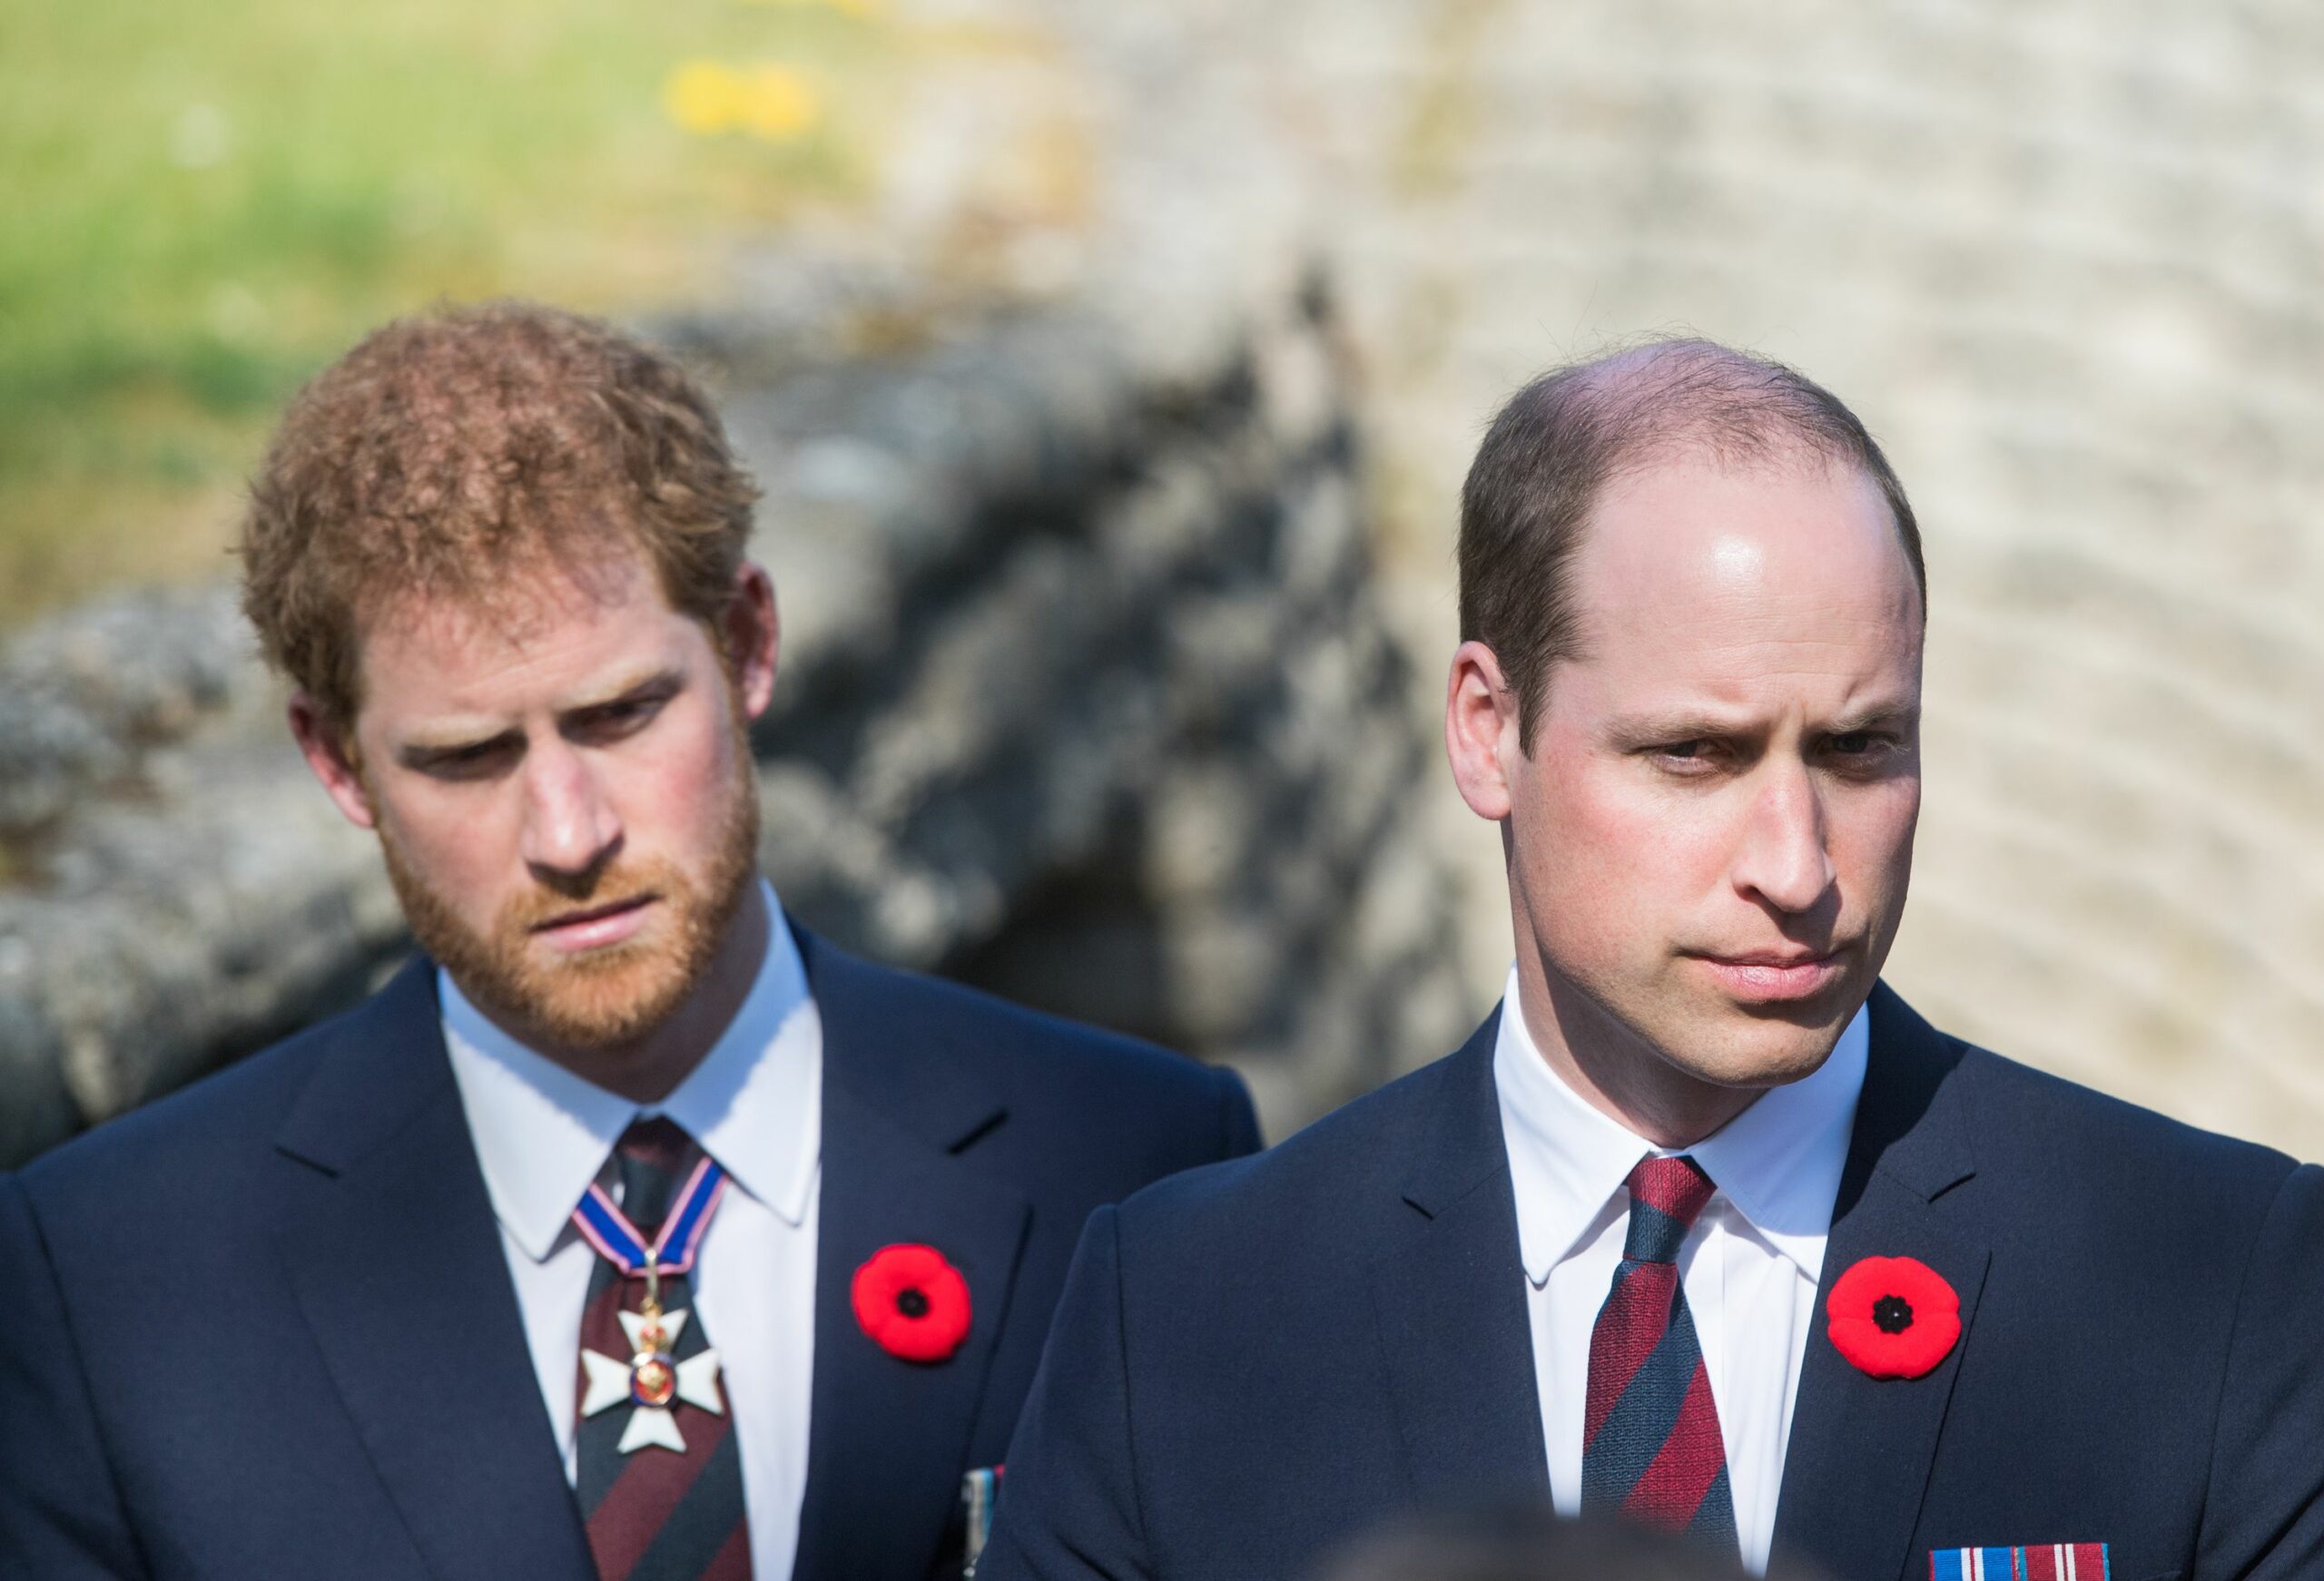 Wales vs Sussex!  Prince William is upset by Prince Harry’s comment about his marriage to Kate Middleton

+2023